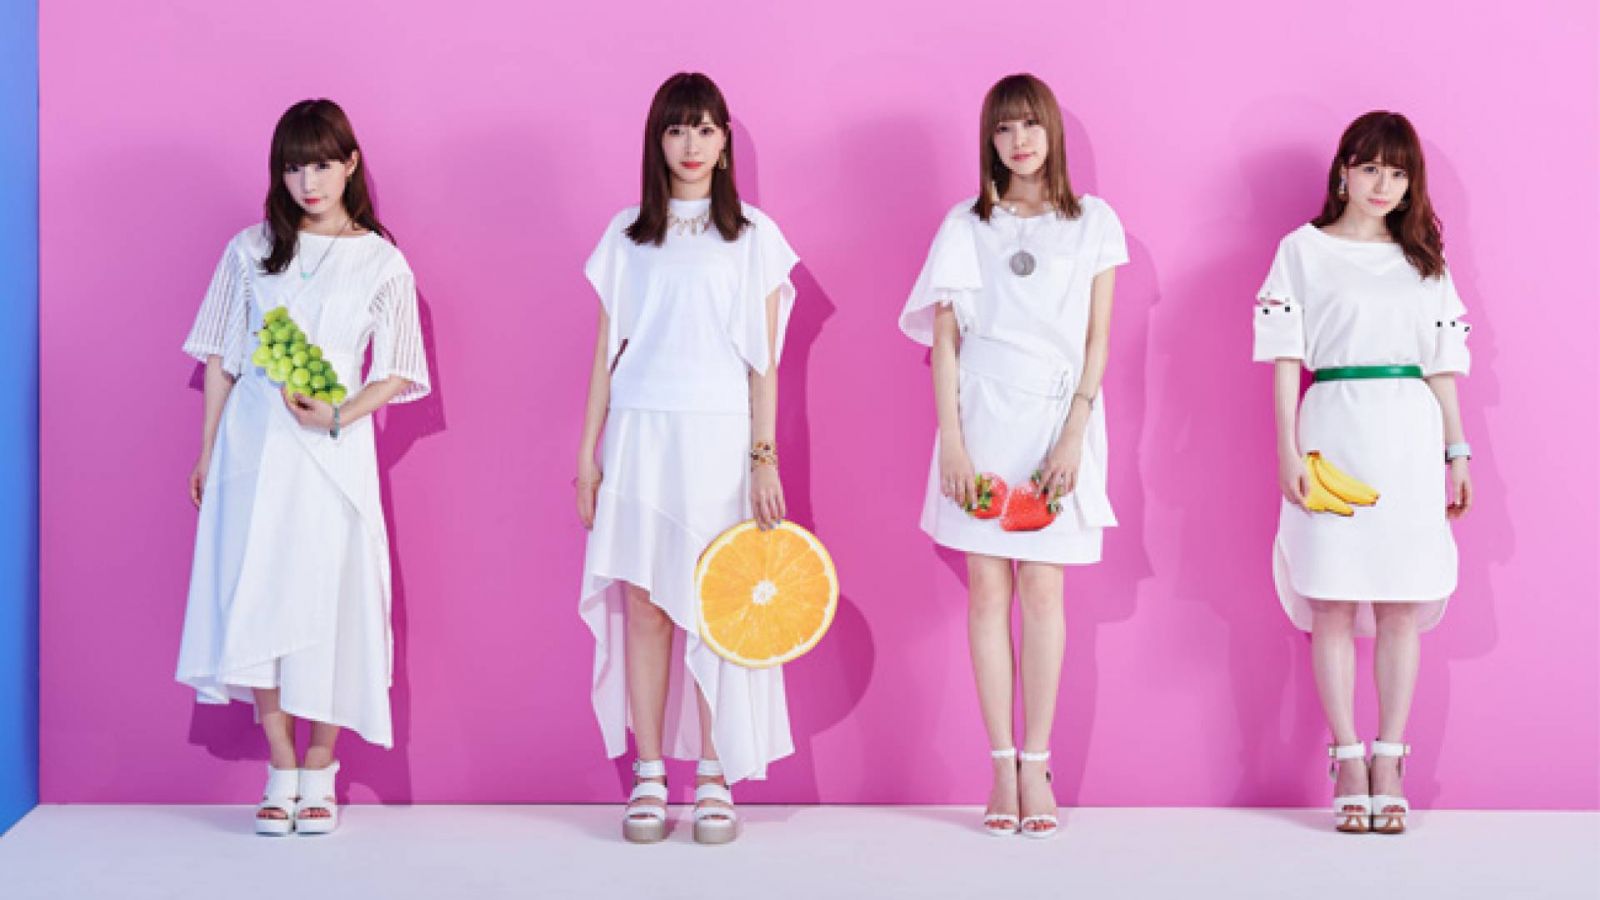 SILENT SIREN © UNIVERSAL MUSIC LLC. All rights reserved.